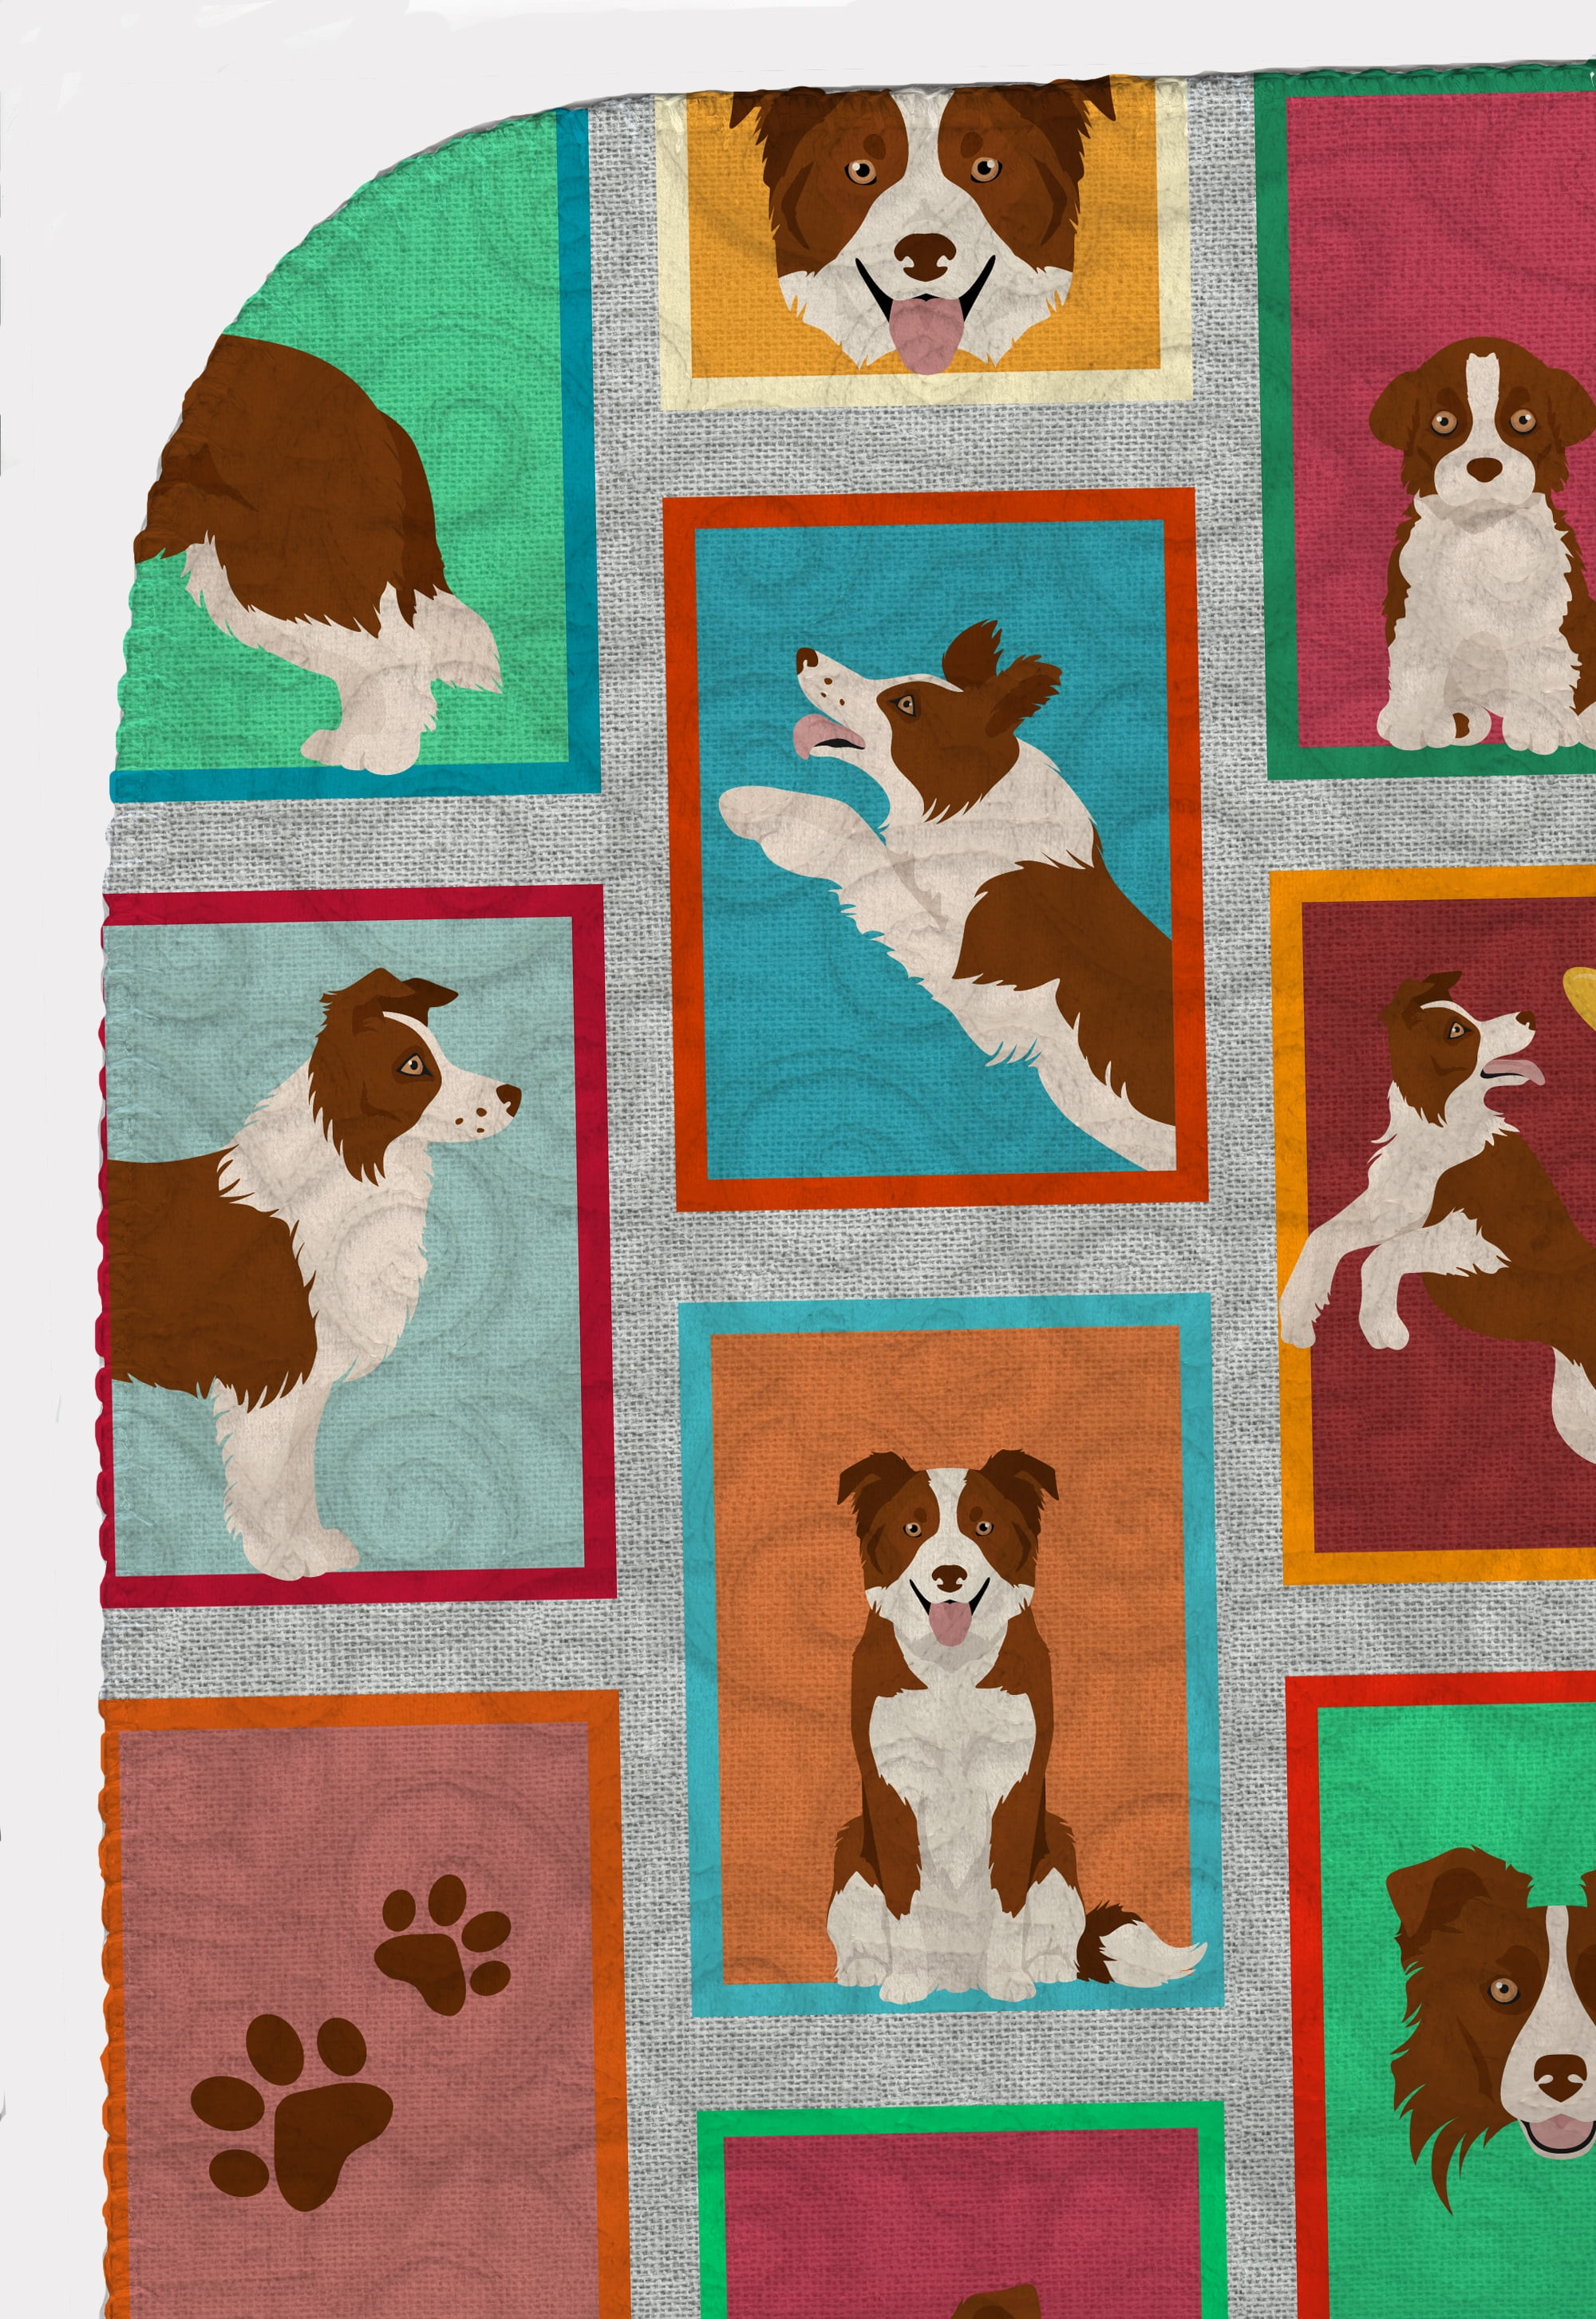 Border Collie Dog Toys - red border collie dog, border collie blanket, border  collie bedding, cute d Shower Curtain by PetFriendly